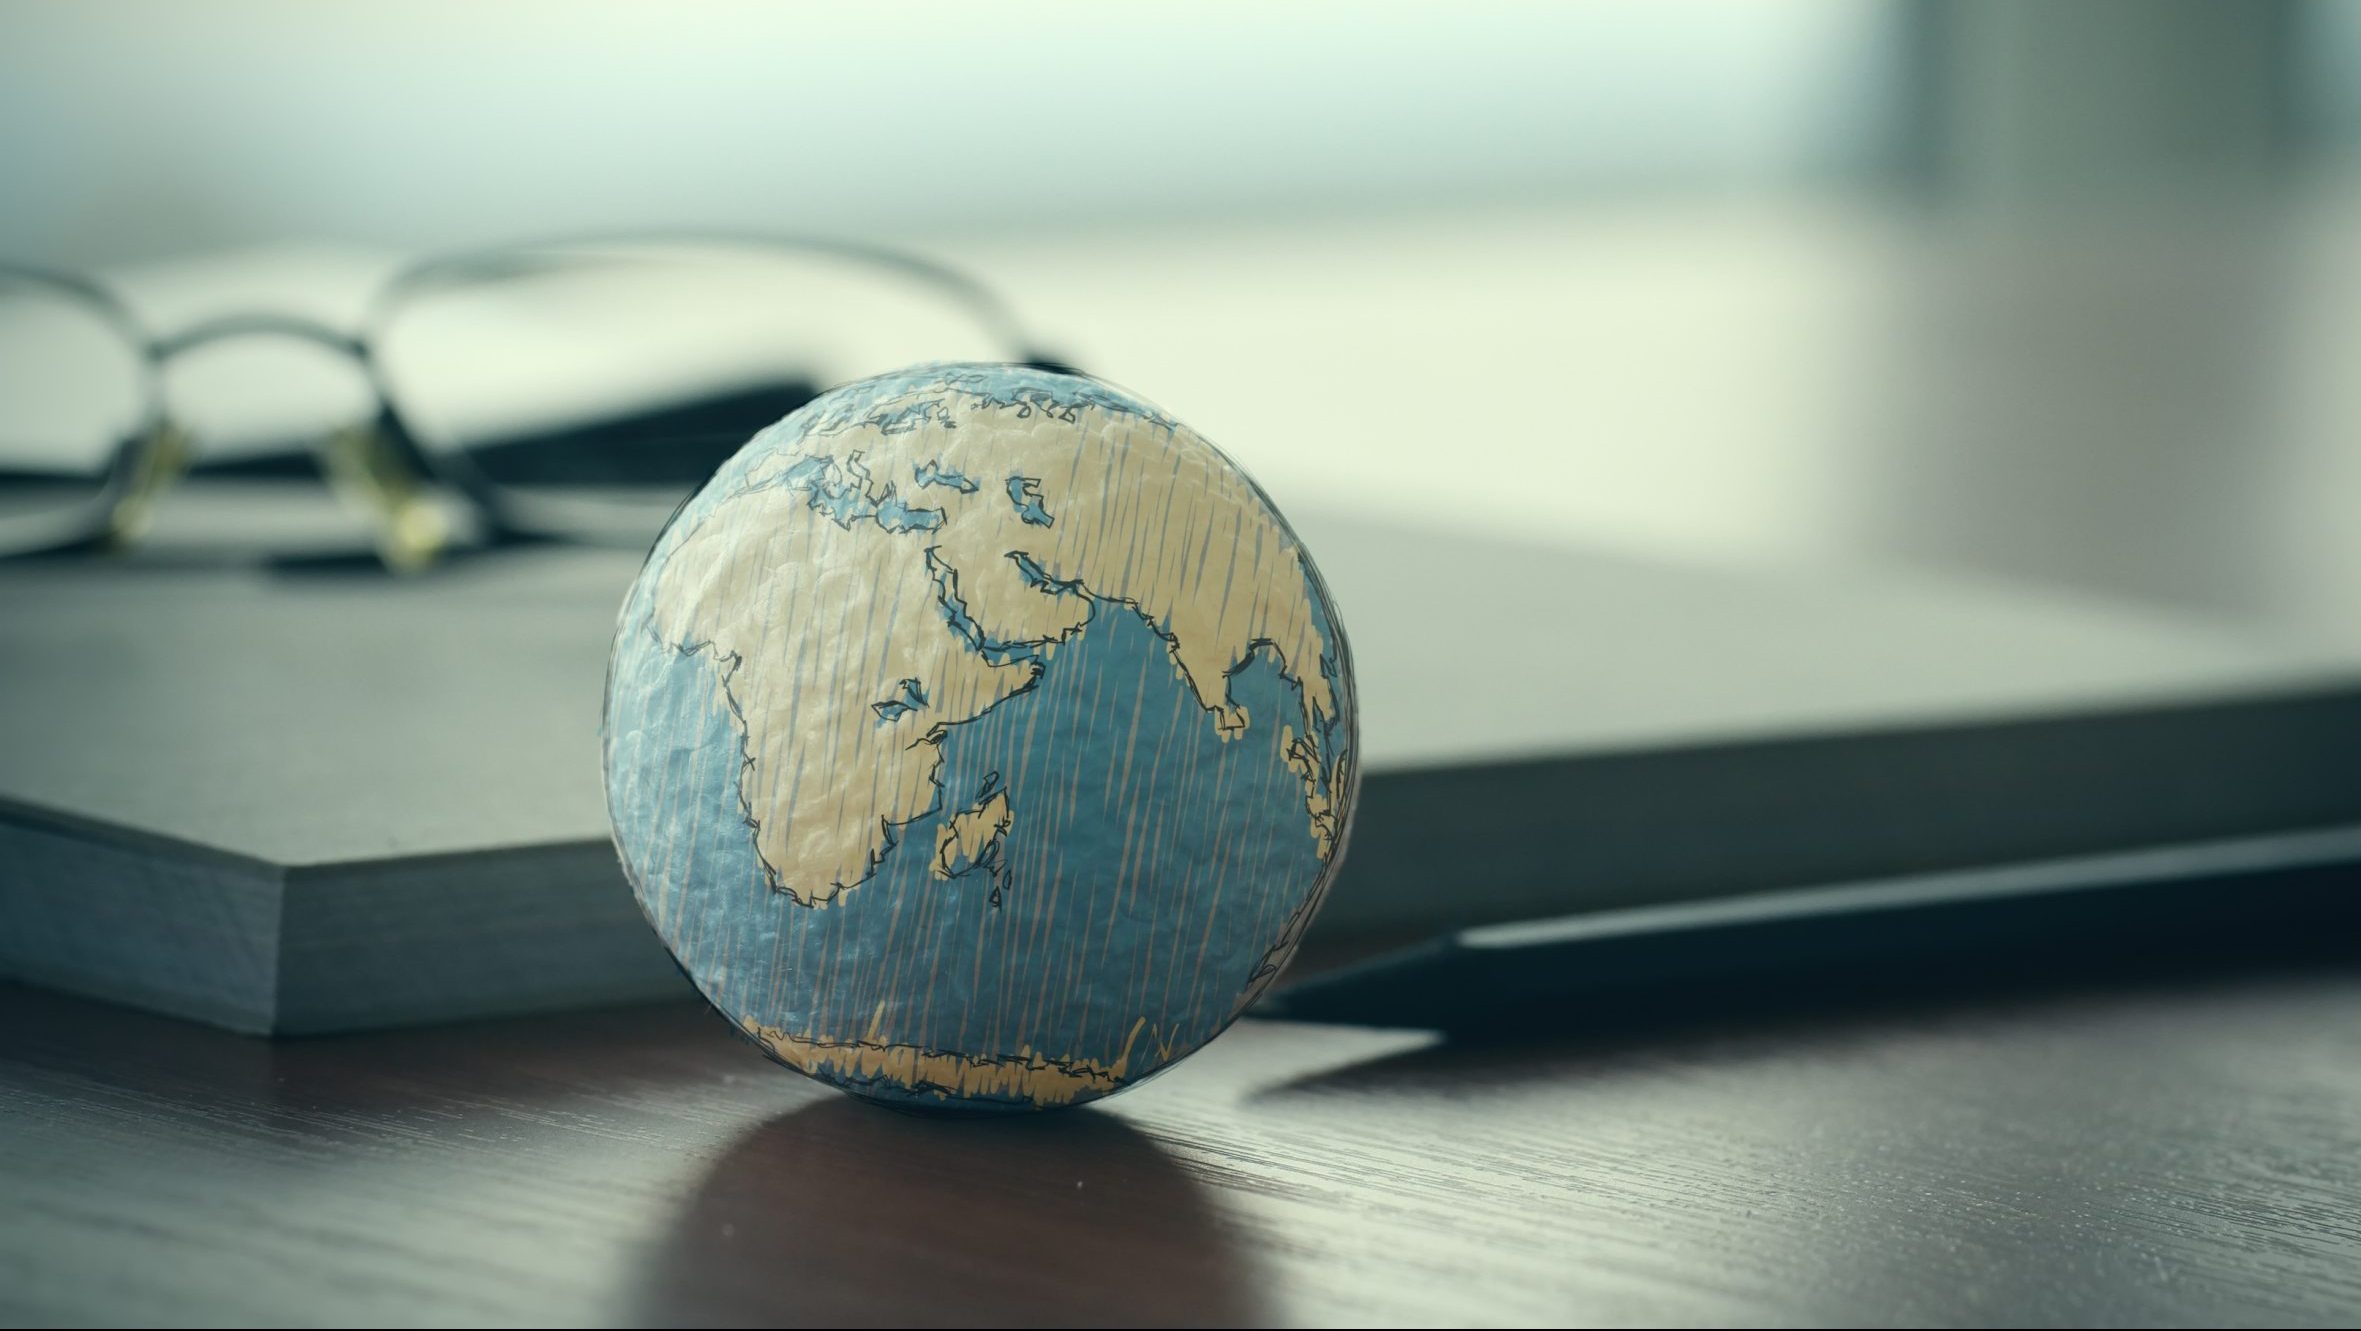 Globe on a desk, illustrating why you need to think globally when starting a business.